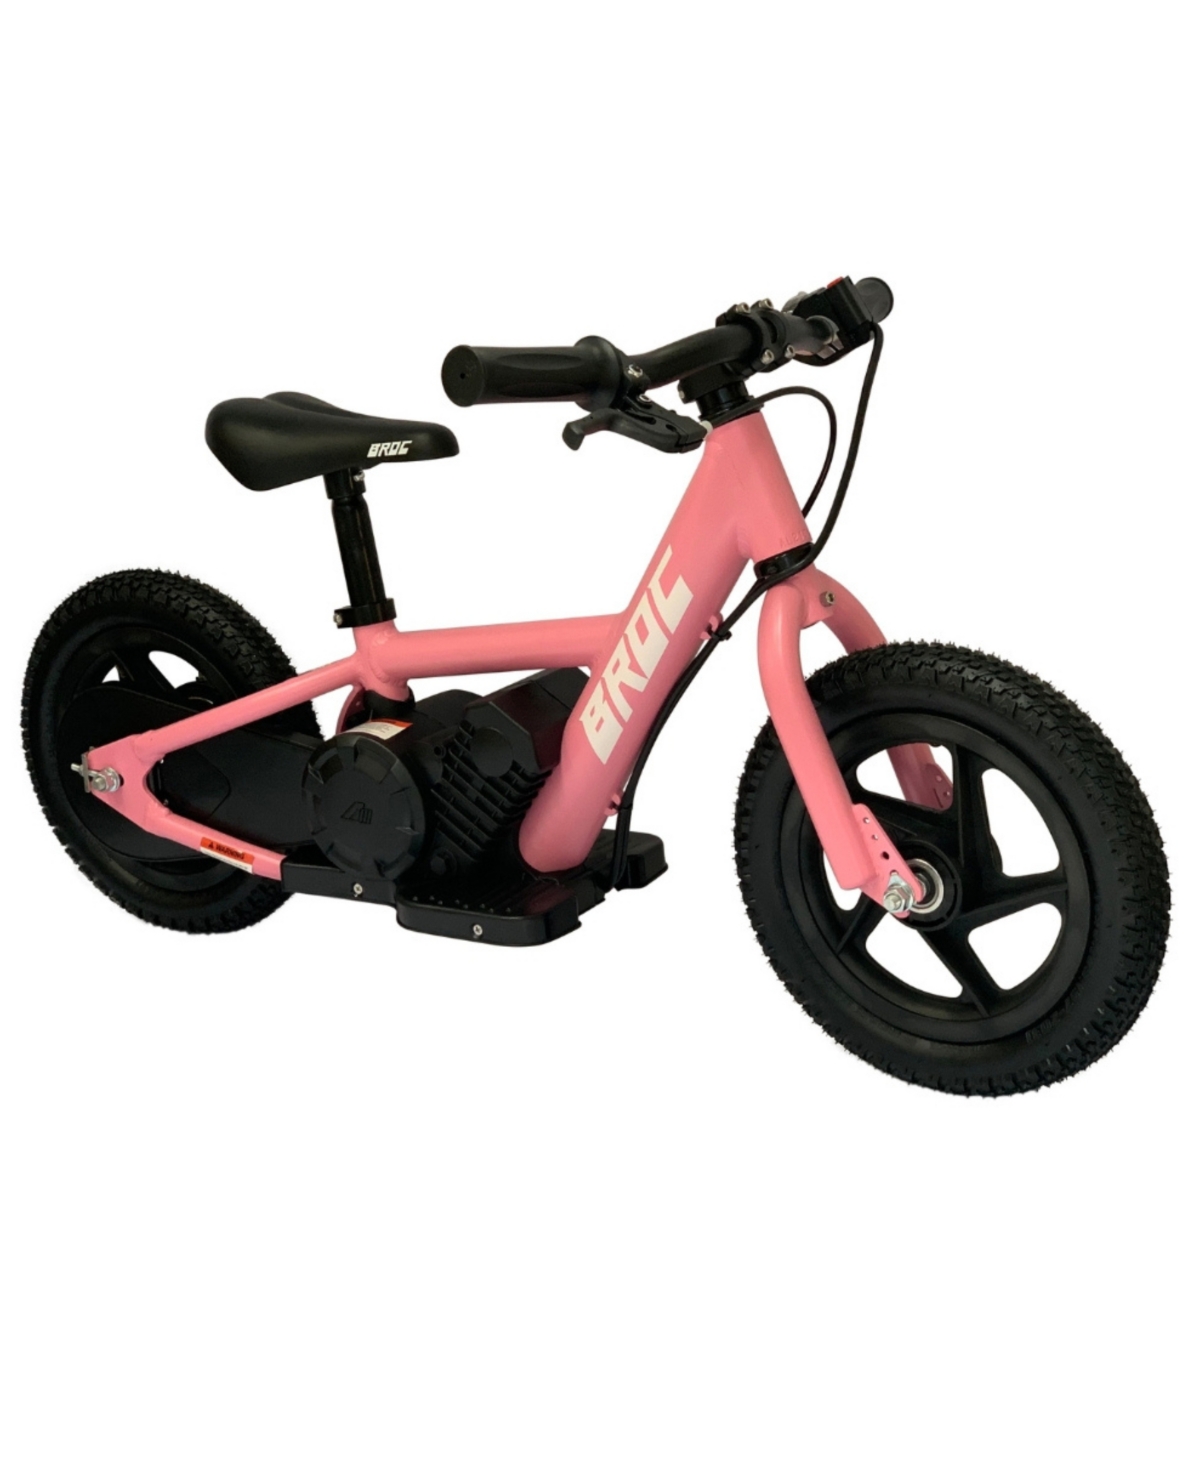 Best Ride On Cars Broc Usa E-bikes D12 Powered Ride-on In Pink